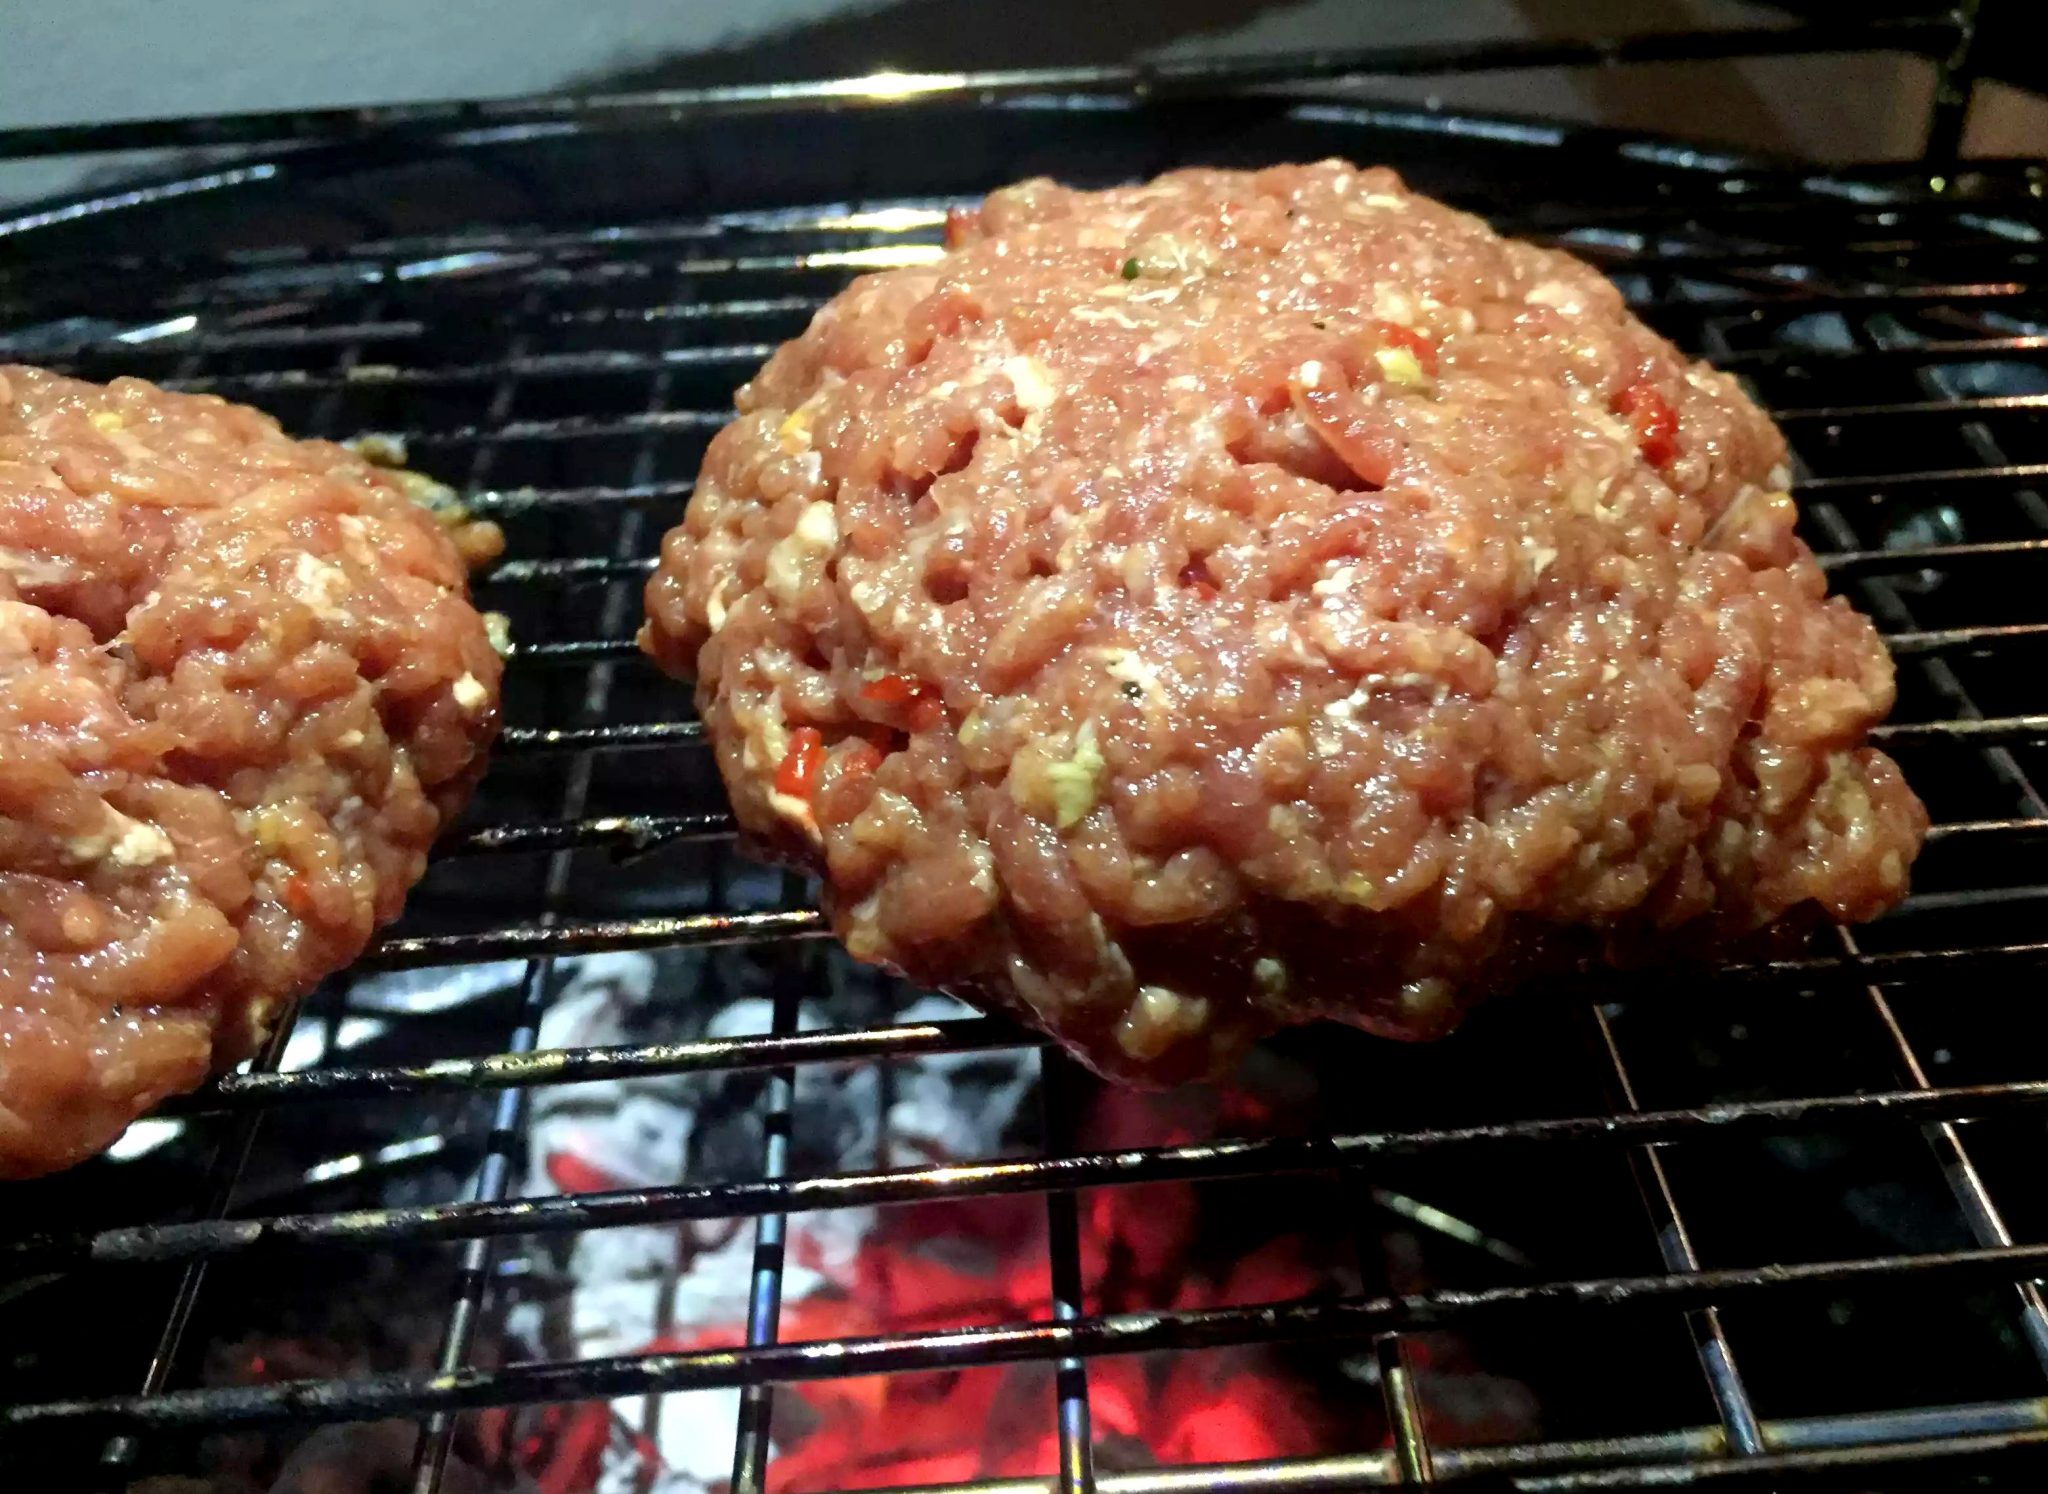 Super Simple Spicy Burgers (Chilli & Garlic by Emma Eats & Explores - SCD, Paleo, Grain-Free, gluten-Free, Dairy-Free, Clean Eating